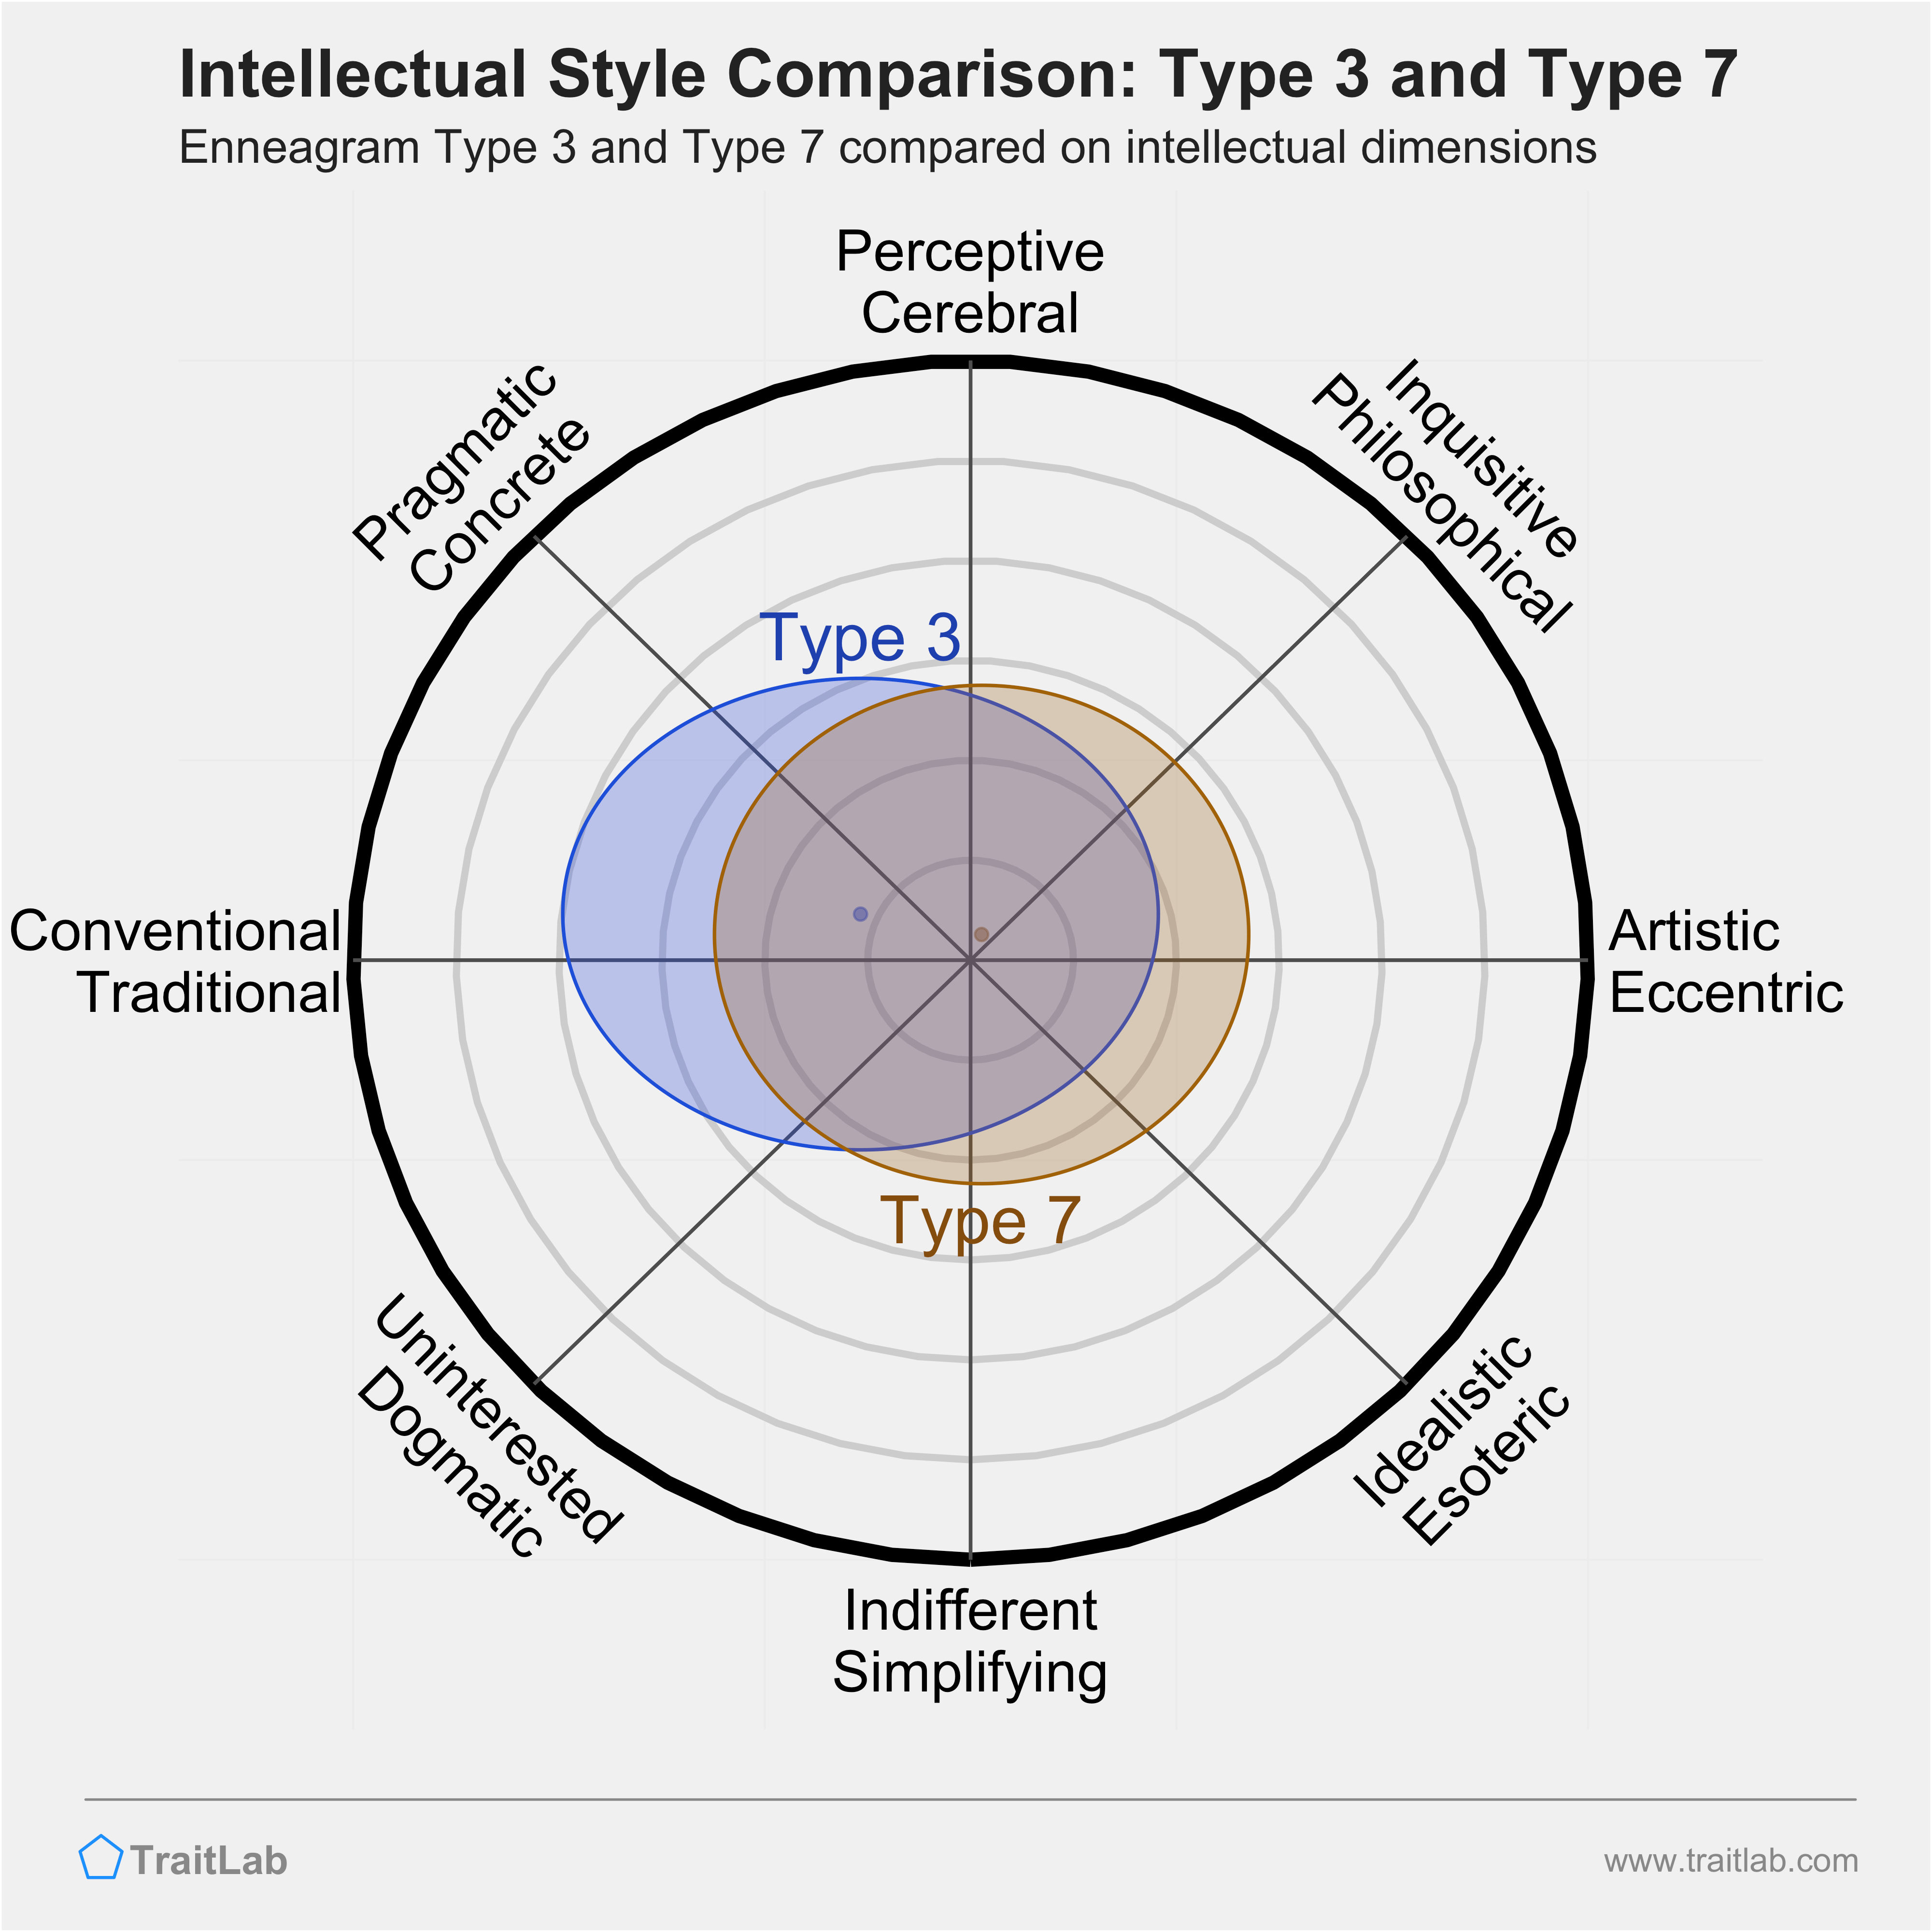 Type 3 and Type 7 comparison across intellectual dimensions